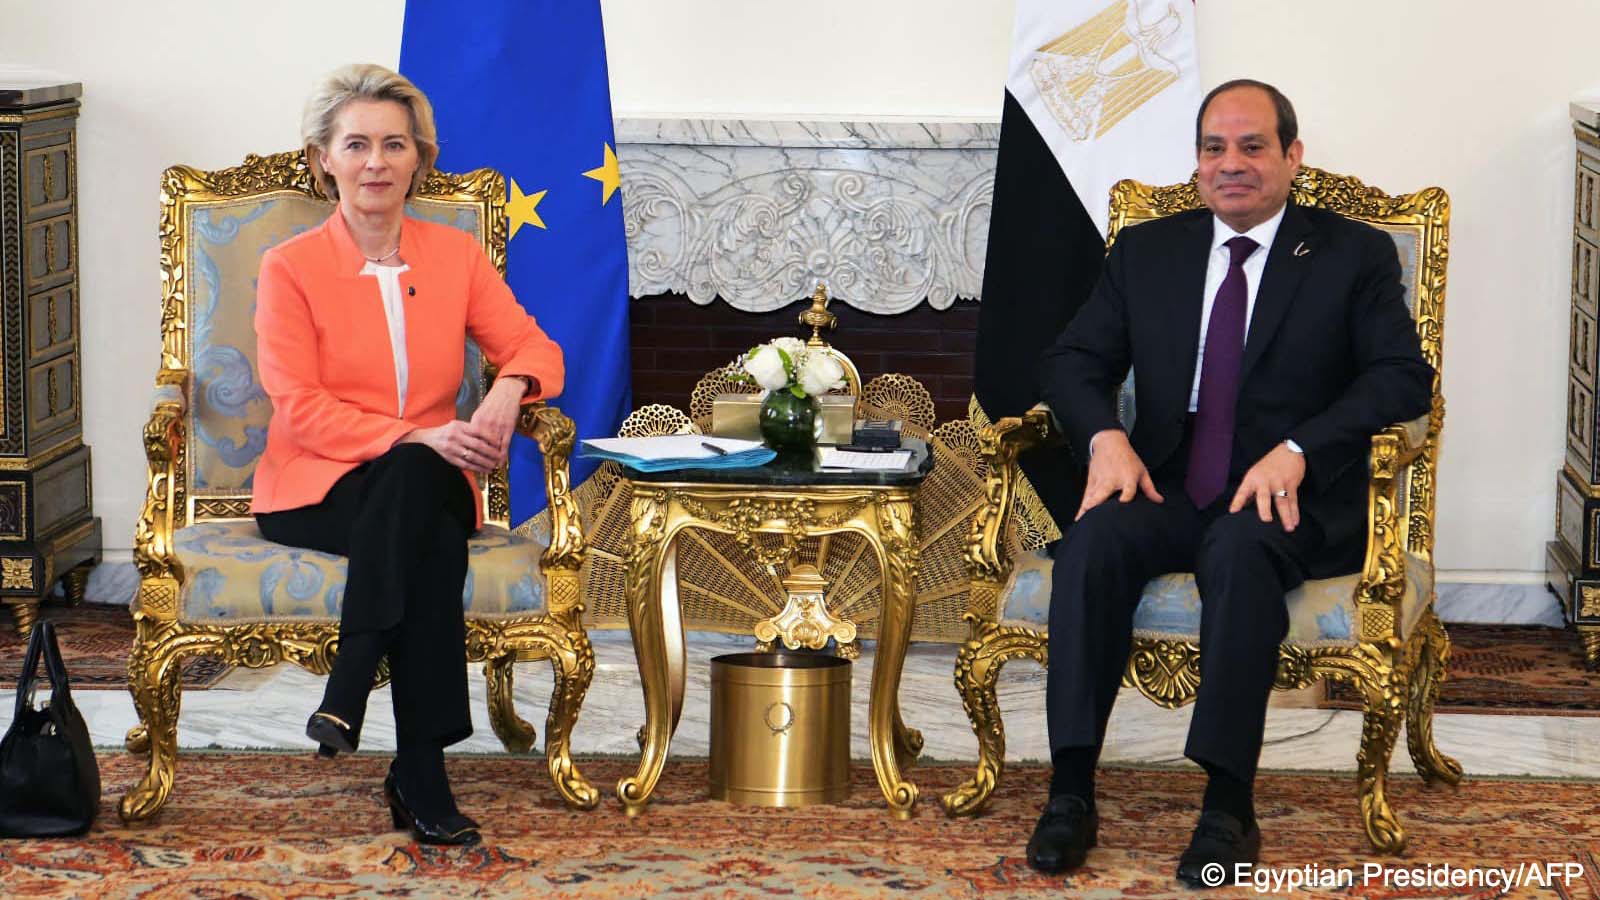 European Commission President Ursula von der Leyen (left) and Egyptian President Abdul Fattah al-Sisi (right) sit on armchairs on either side of a table